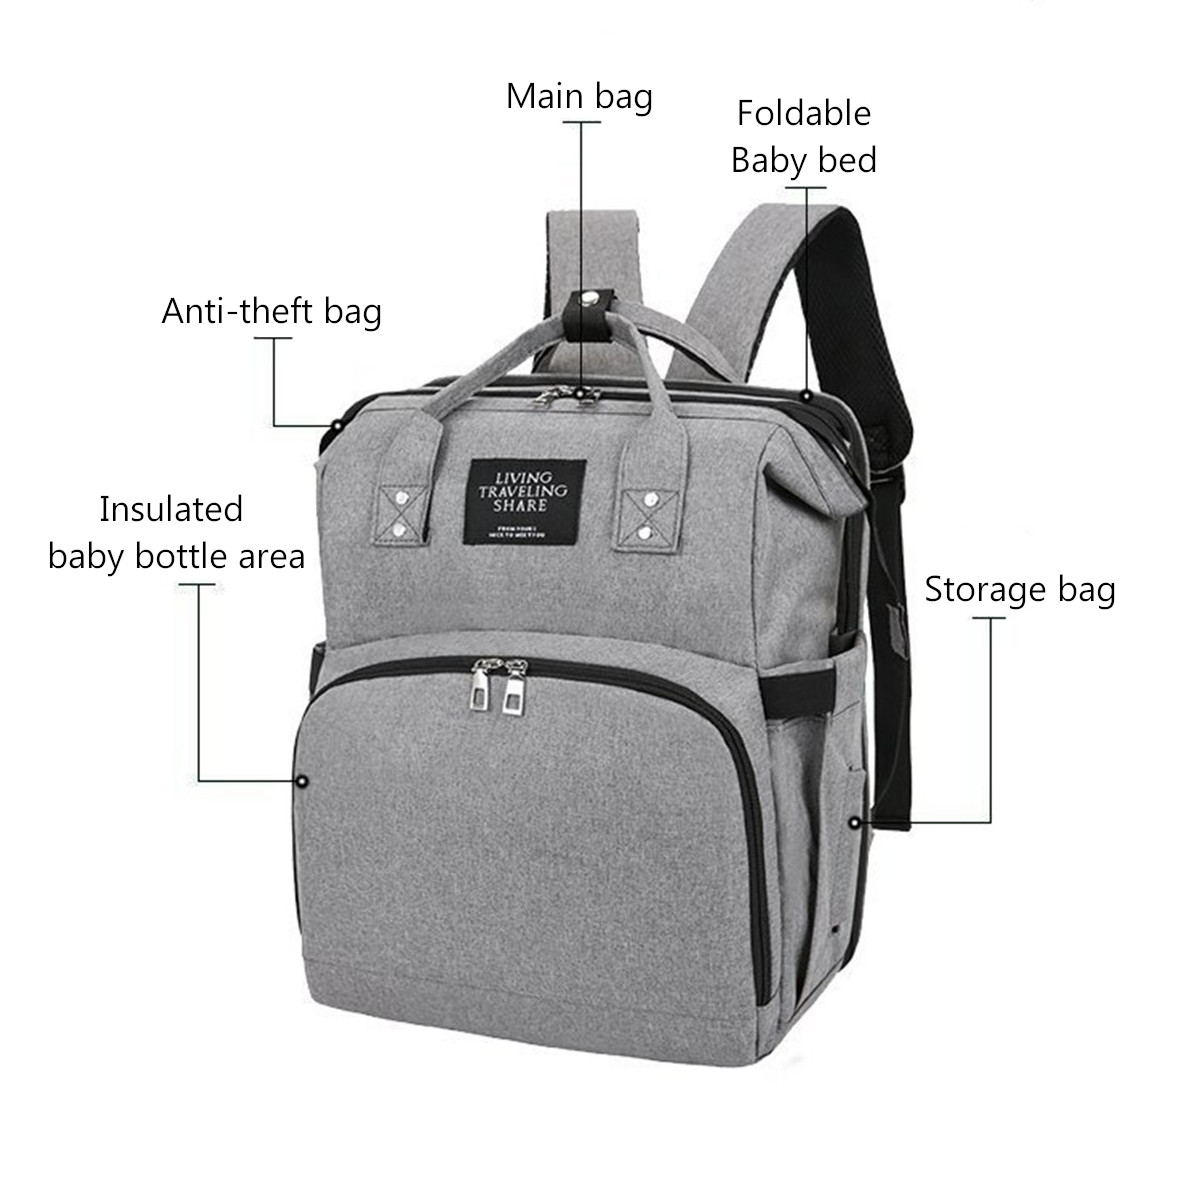 Multifunctional-Waterproof-Mummy-Bag-Portable-Diaper-Bag-Large-capacity-Folding-Bed-Bag-Out-of-bed-B-1916752-9